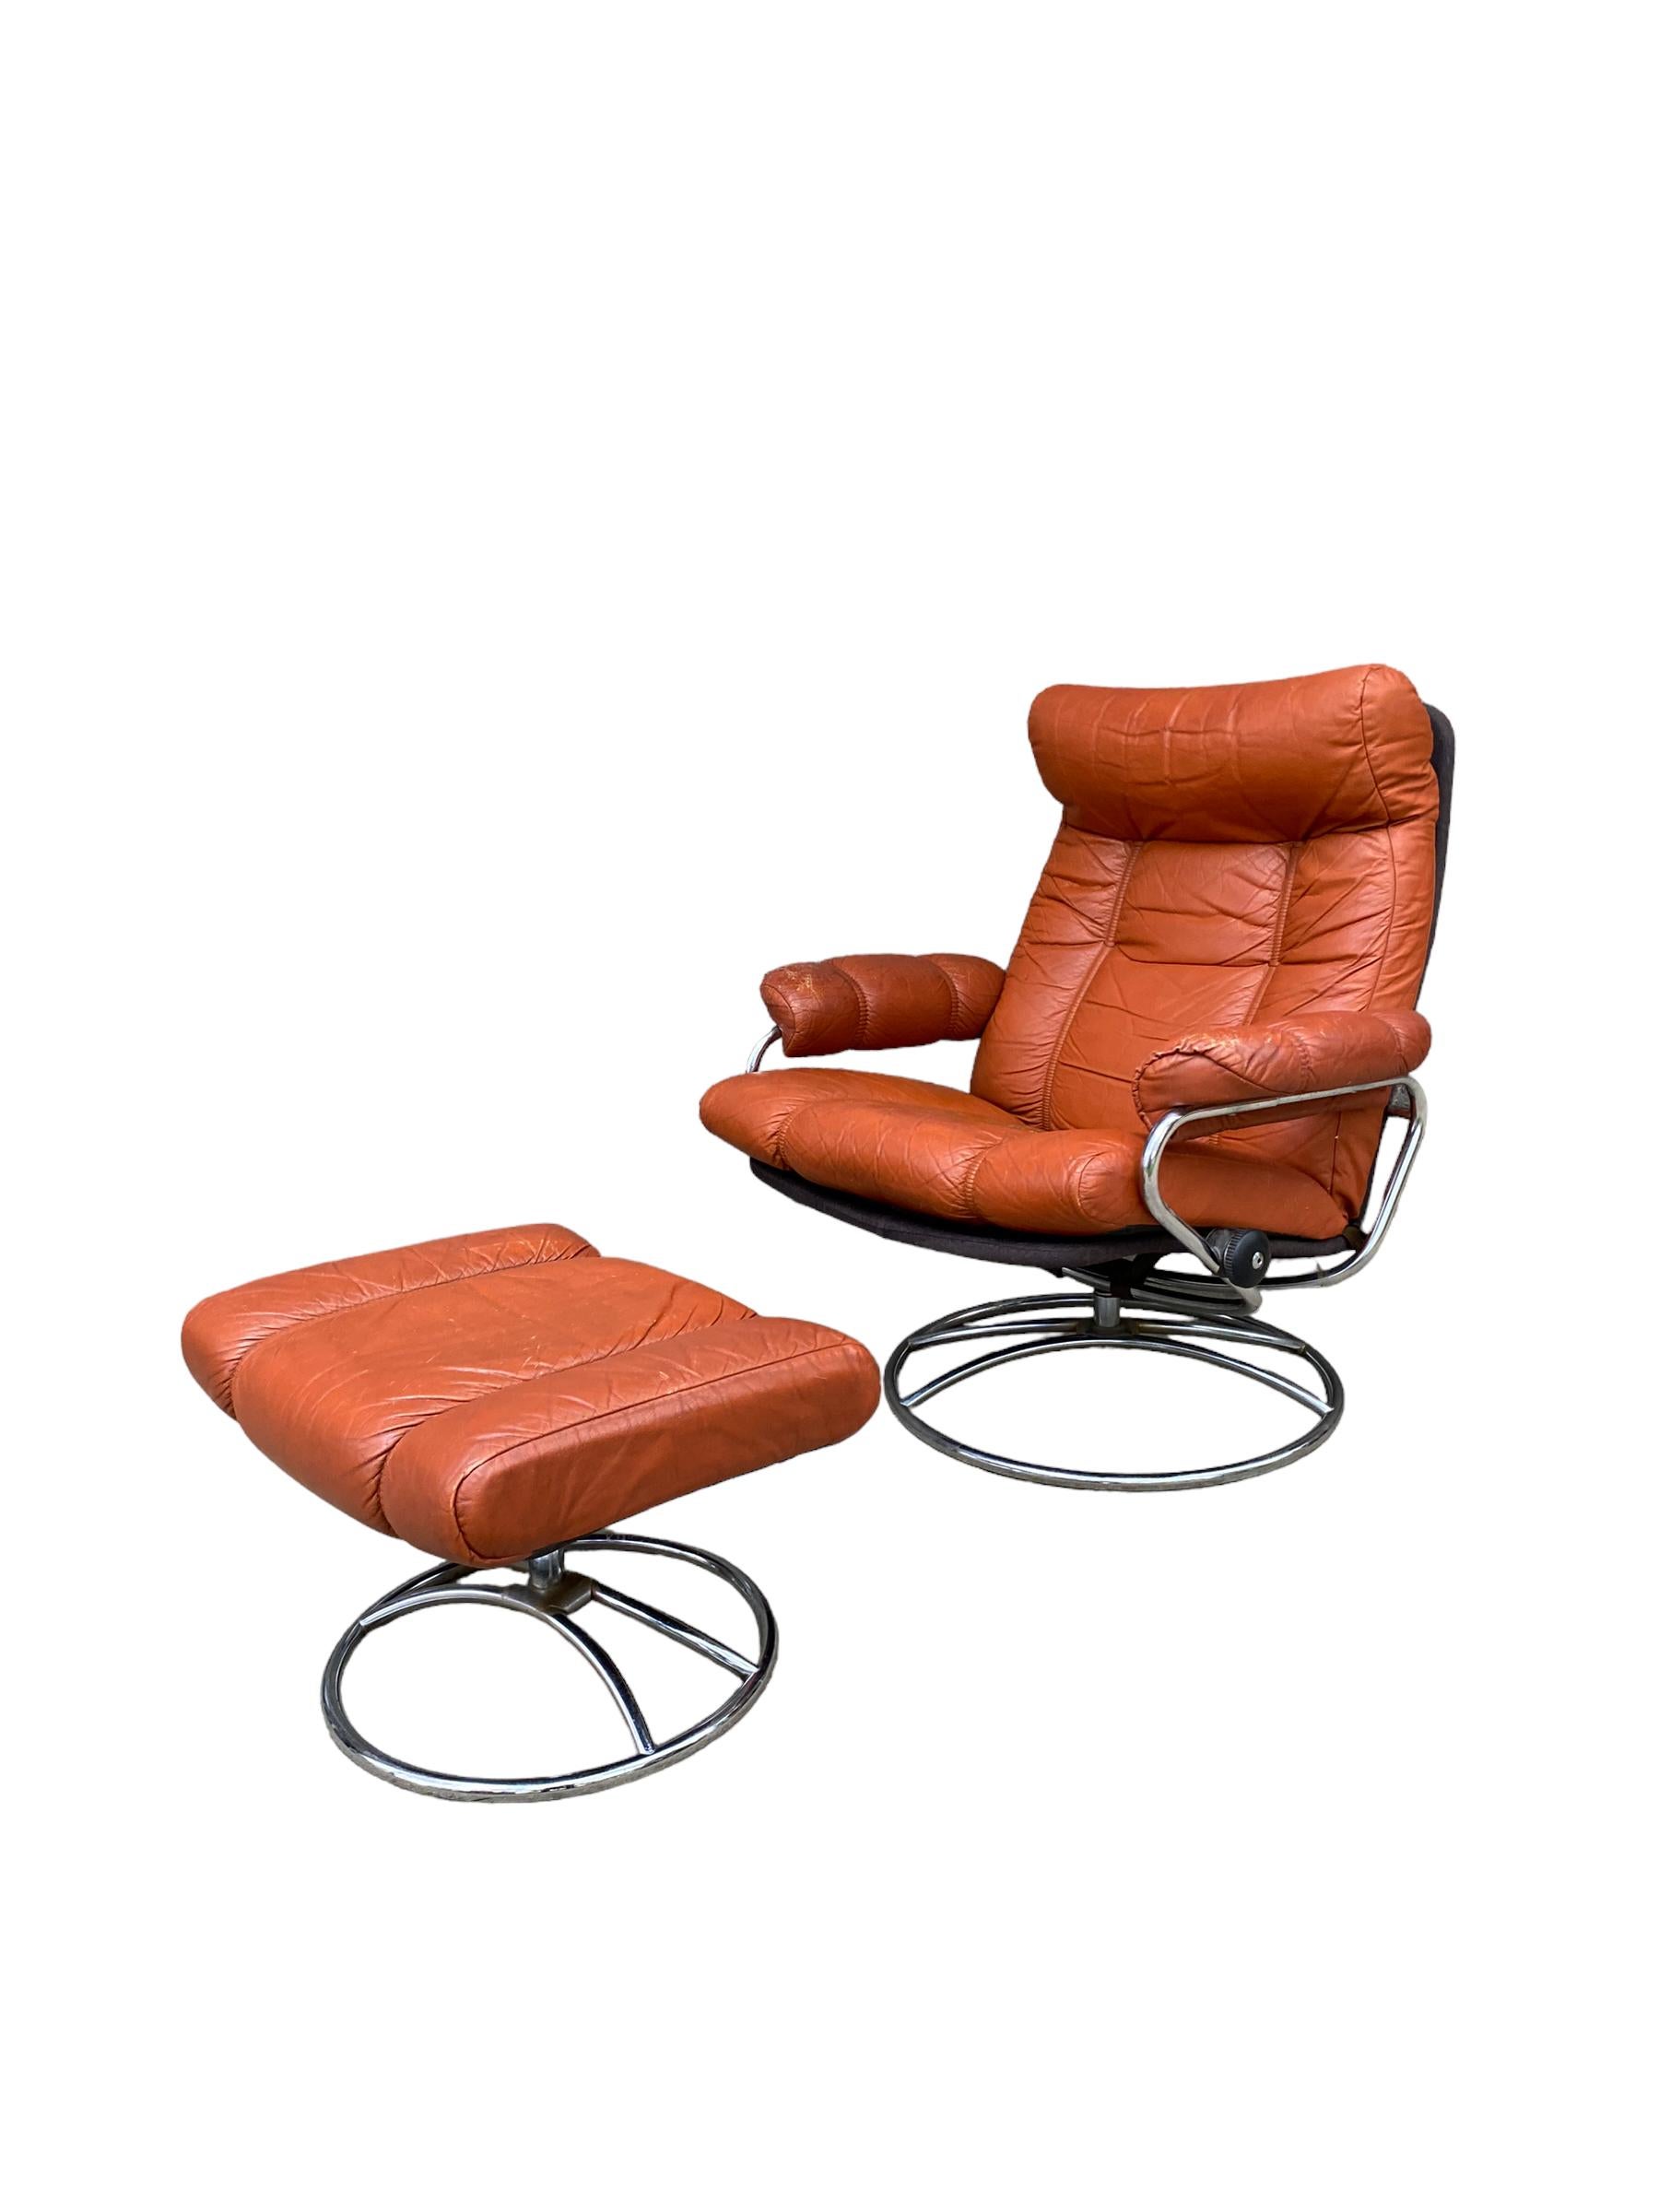 Ekornes Stressless reclining lounge chair and ottoman. Elegant mid century Scandinavian design with tubular bent chrome frame and burnt orange leather cushion. Lounge in comfort with this timeless design.